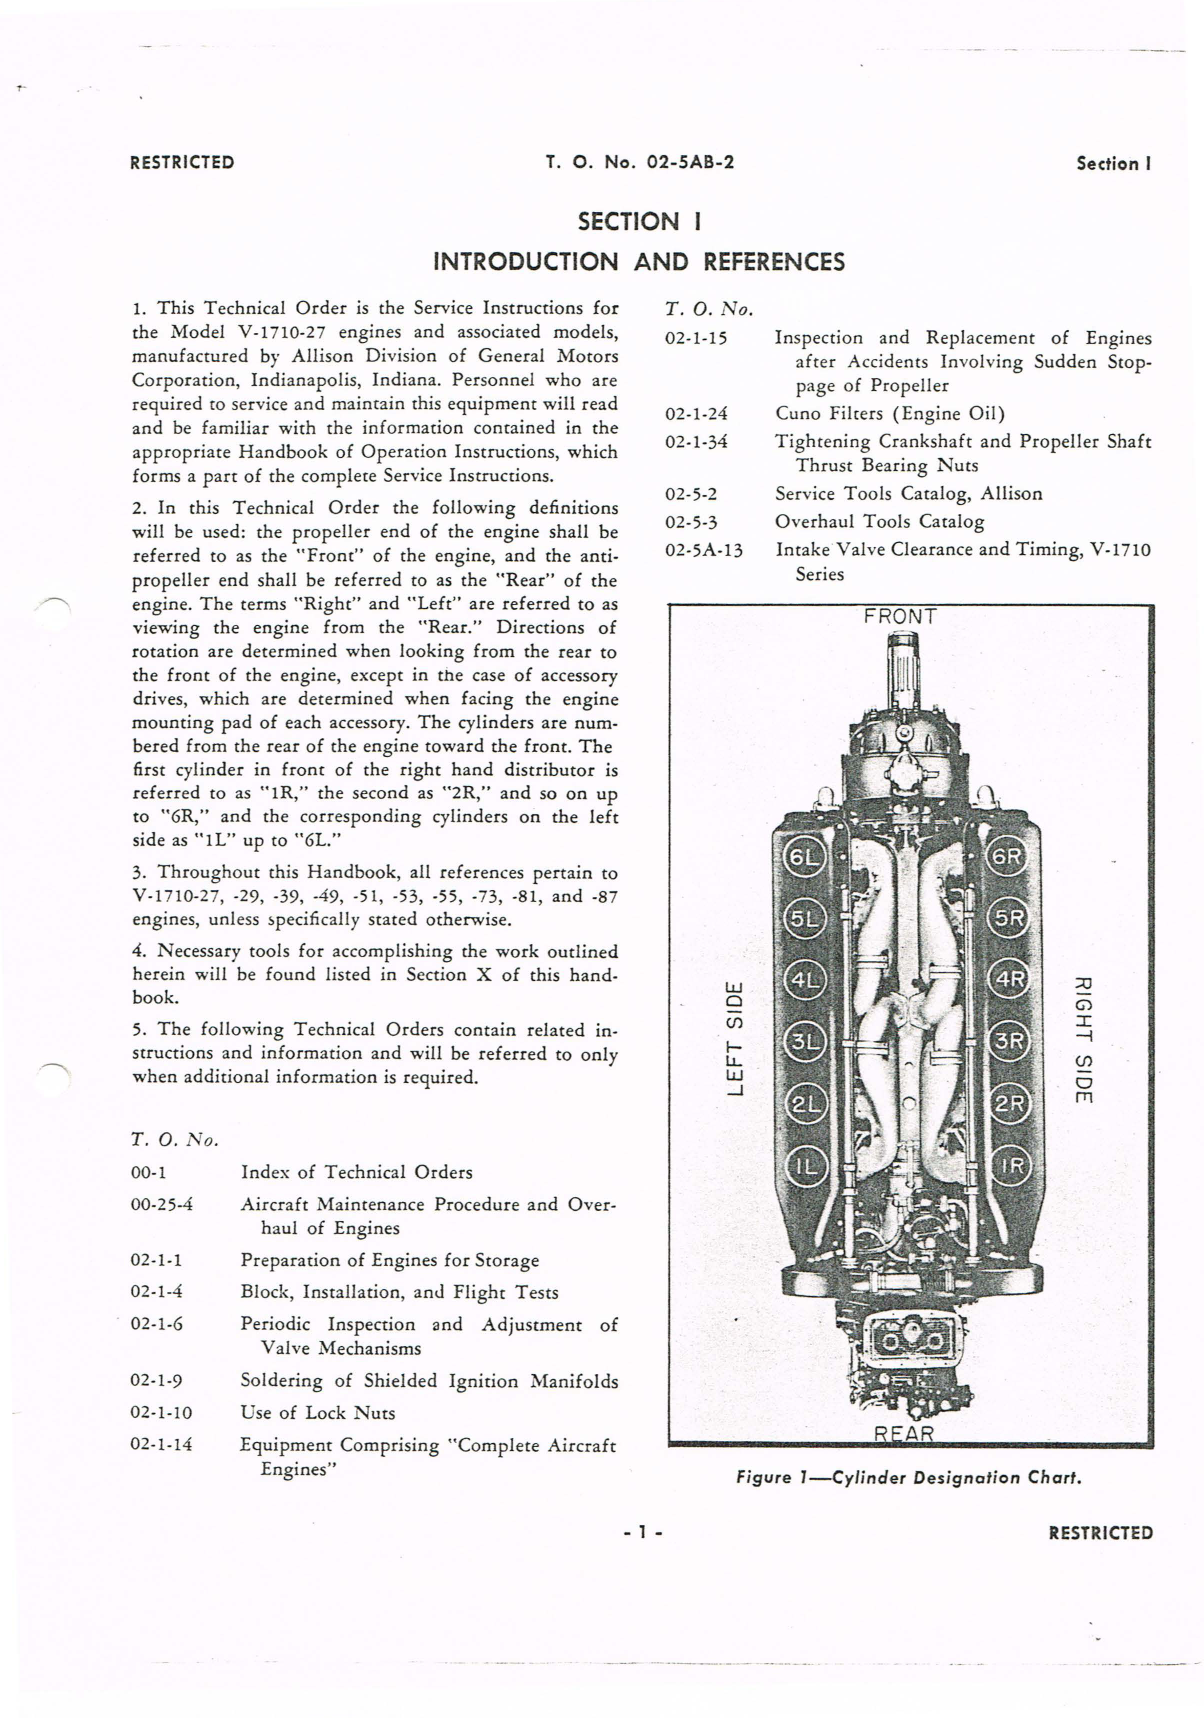 Sample page 7 from AirCorps Library document: Service Instructions for V-1710 Series Engines